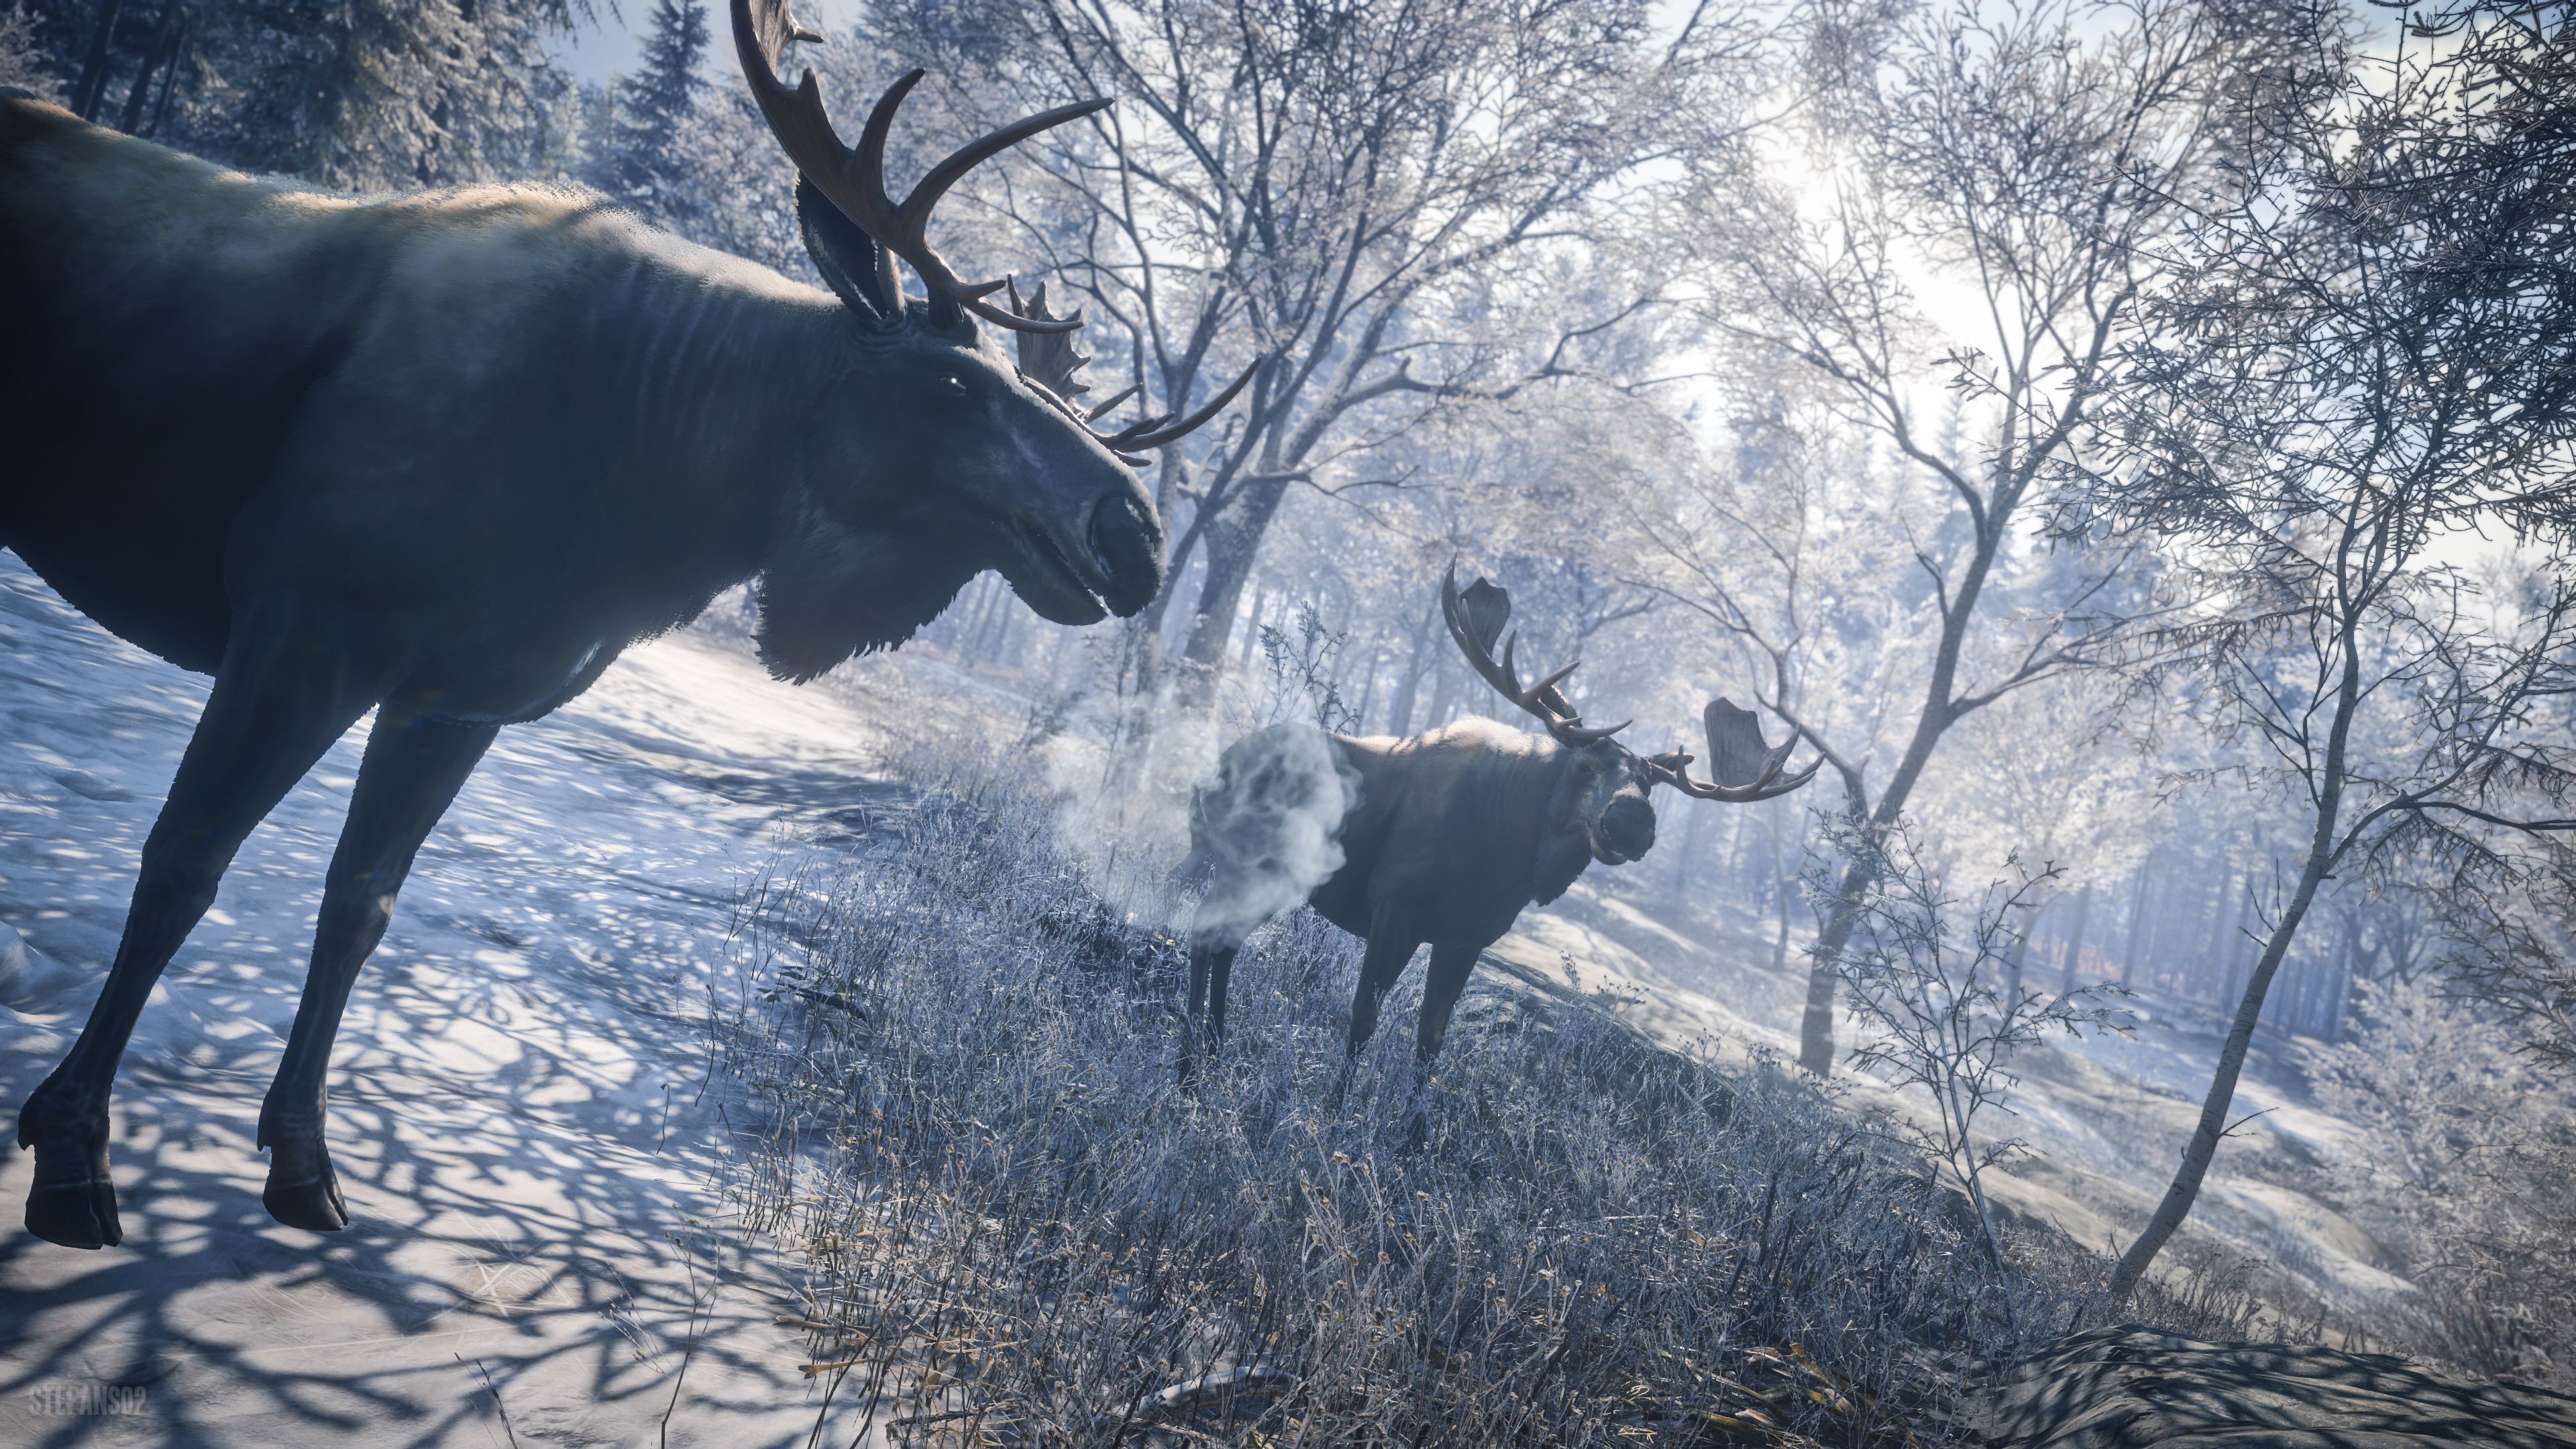 TheHunter: Call of the Wild / Welcome to the Moose Meeting 4k Ultra HD Wallpaper